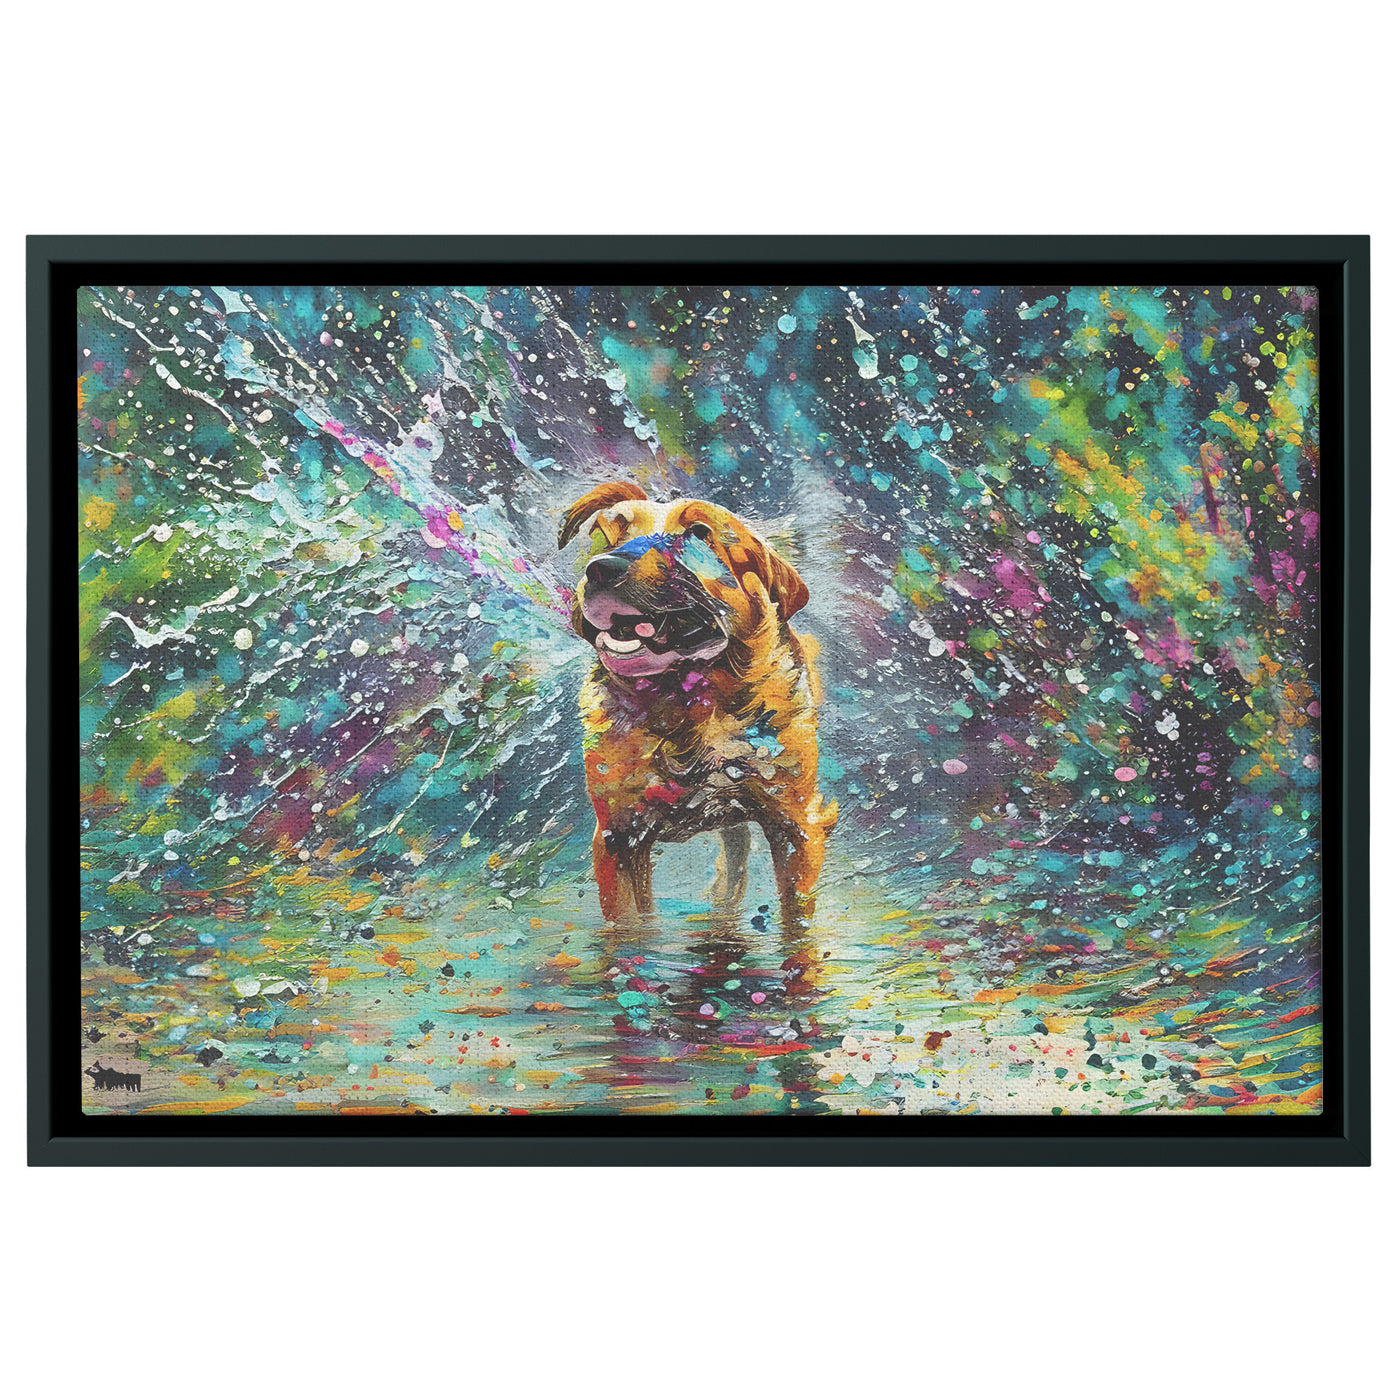 Getting Drenched II - Framed Wrapped Canvas